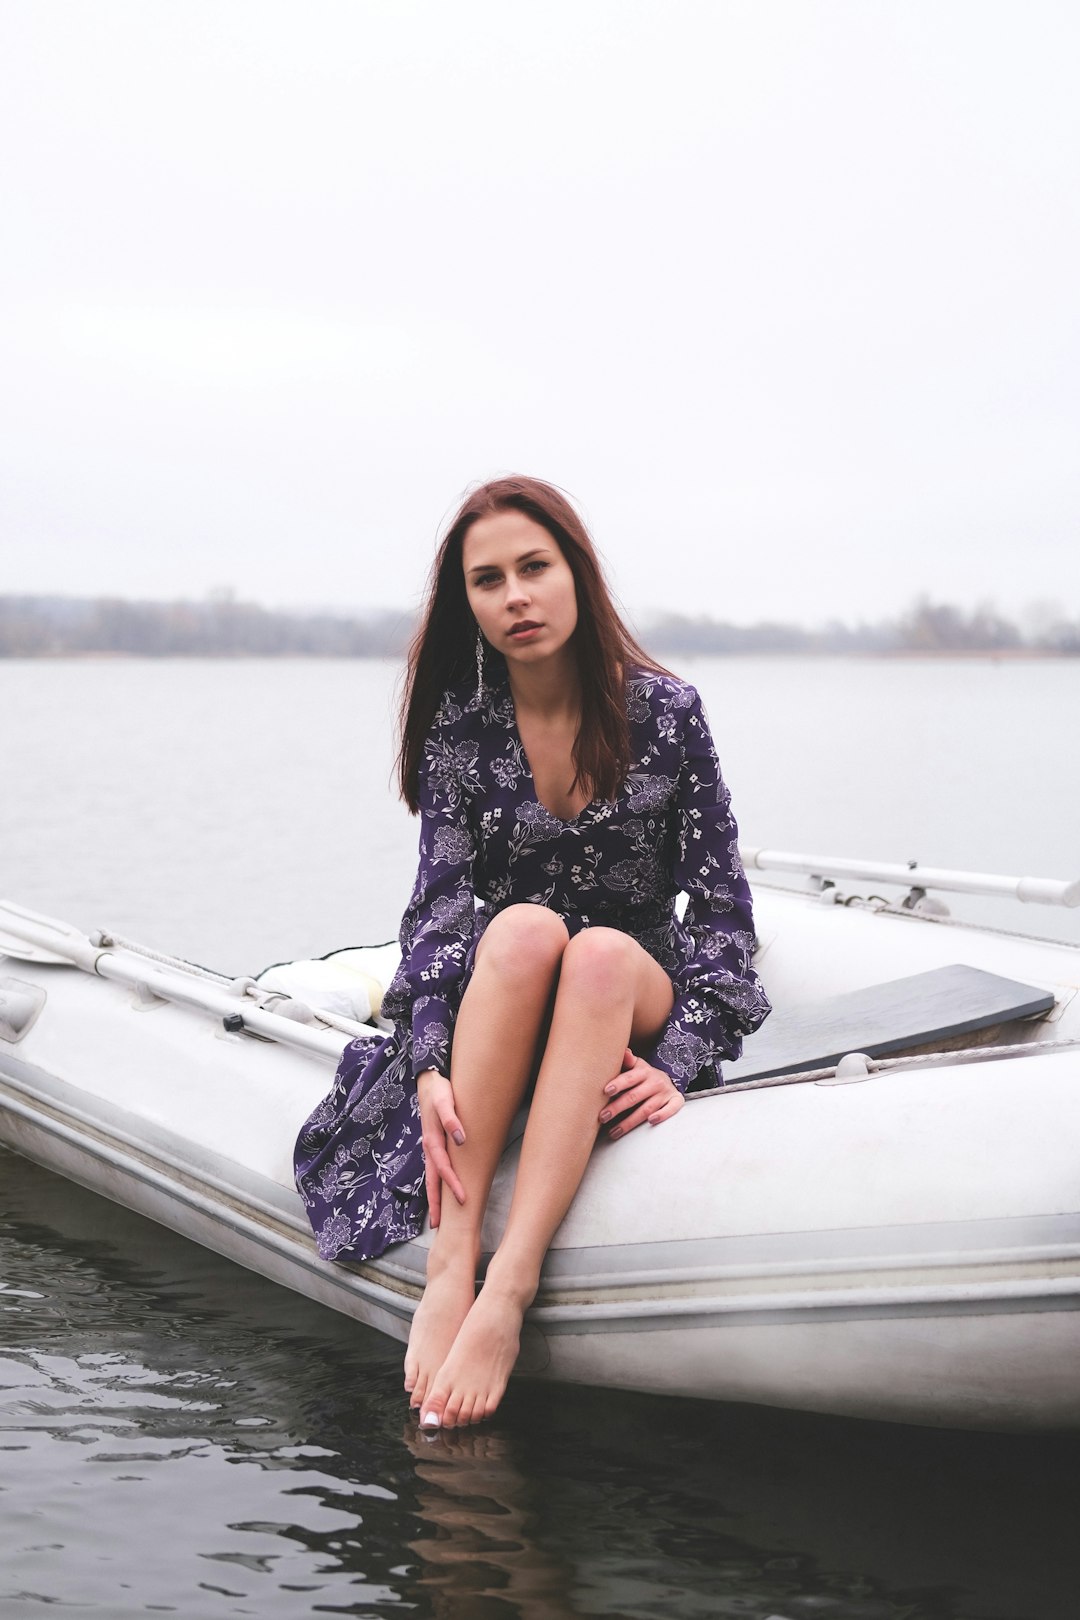 woman in black and white floral dress sitting on white boat during daytime